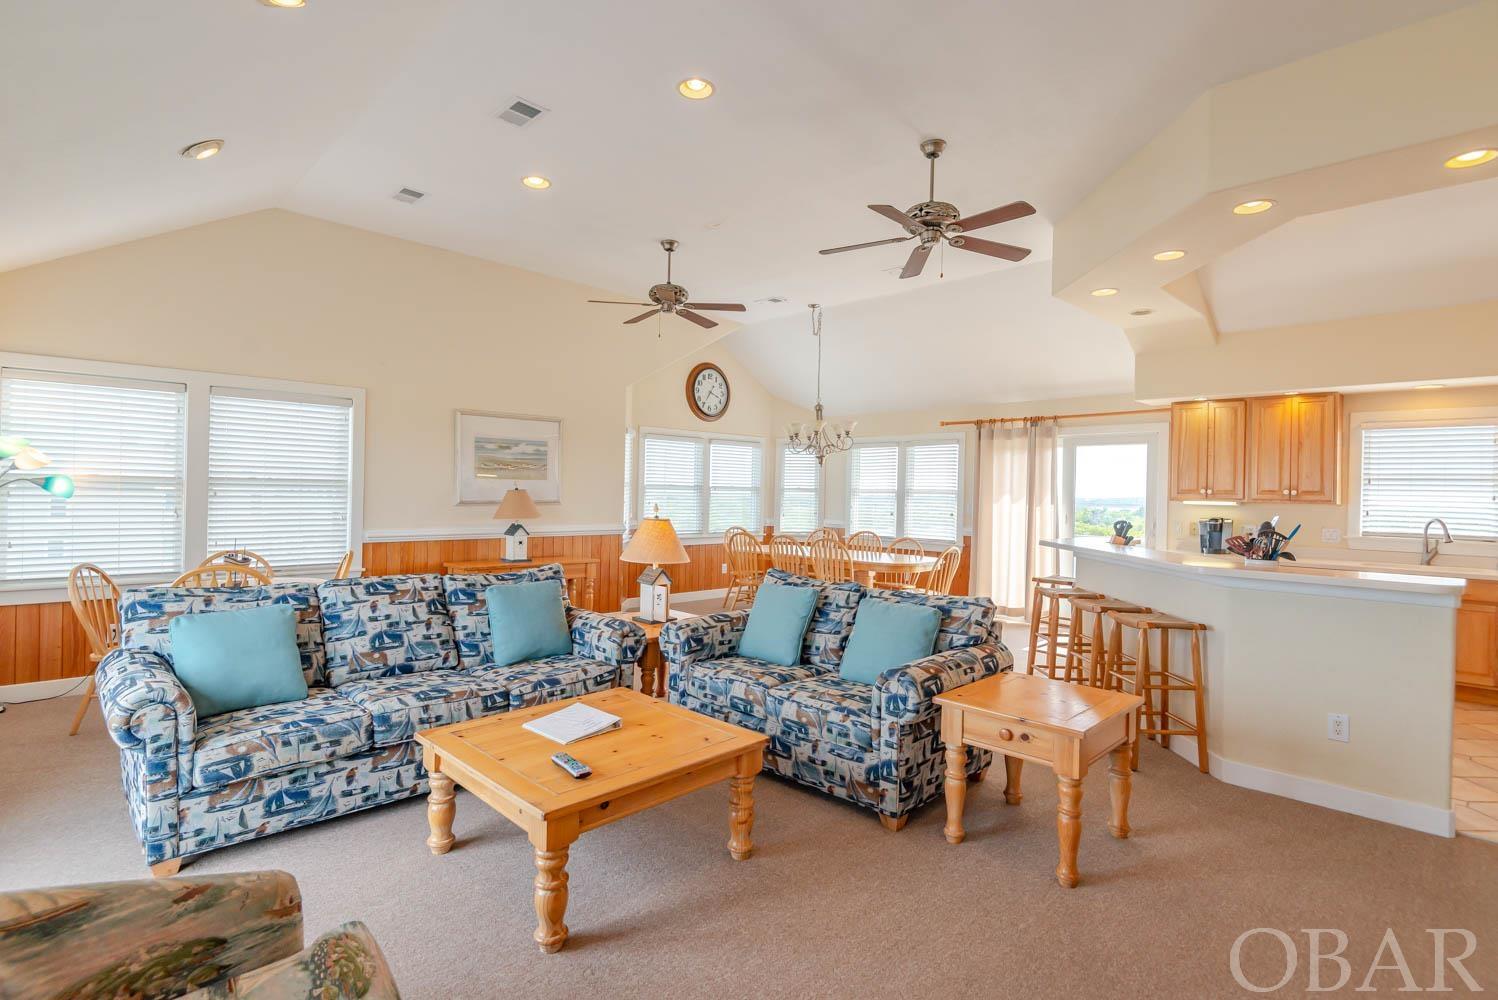 8902 Old Oregon Inlet Road, Nags Head, NC 27959, 7 Bedrooms Bedrooms, ,7 BathroomsBathrooms,Residential,For sale,Old Oregon Inlet Road,126167